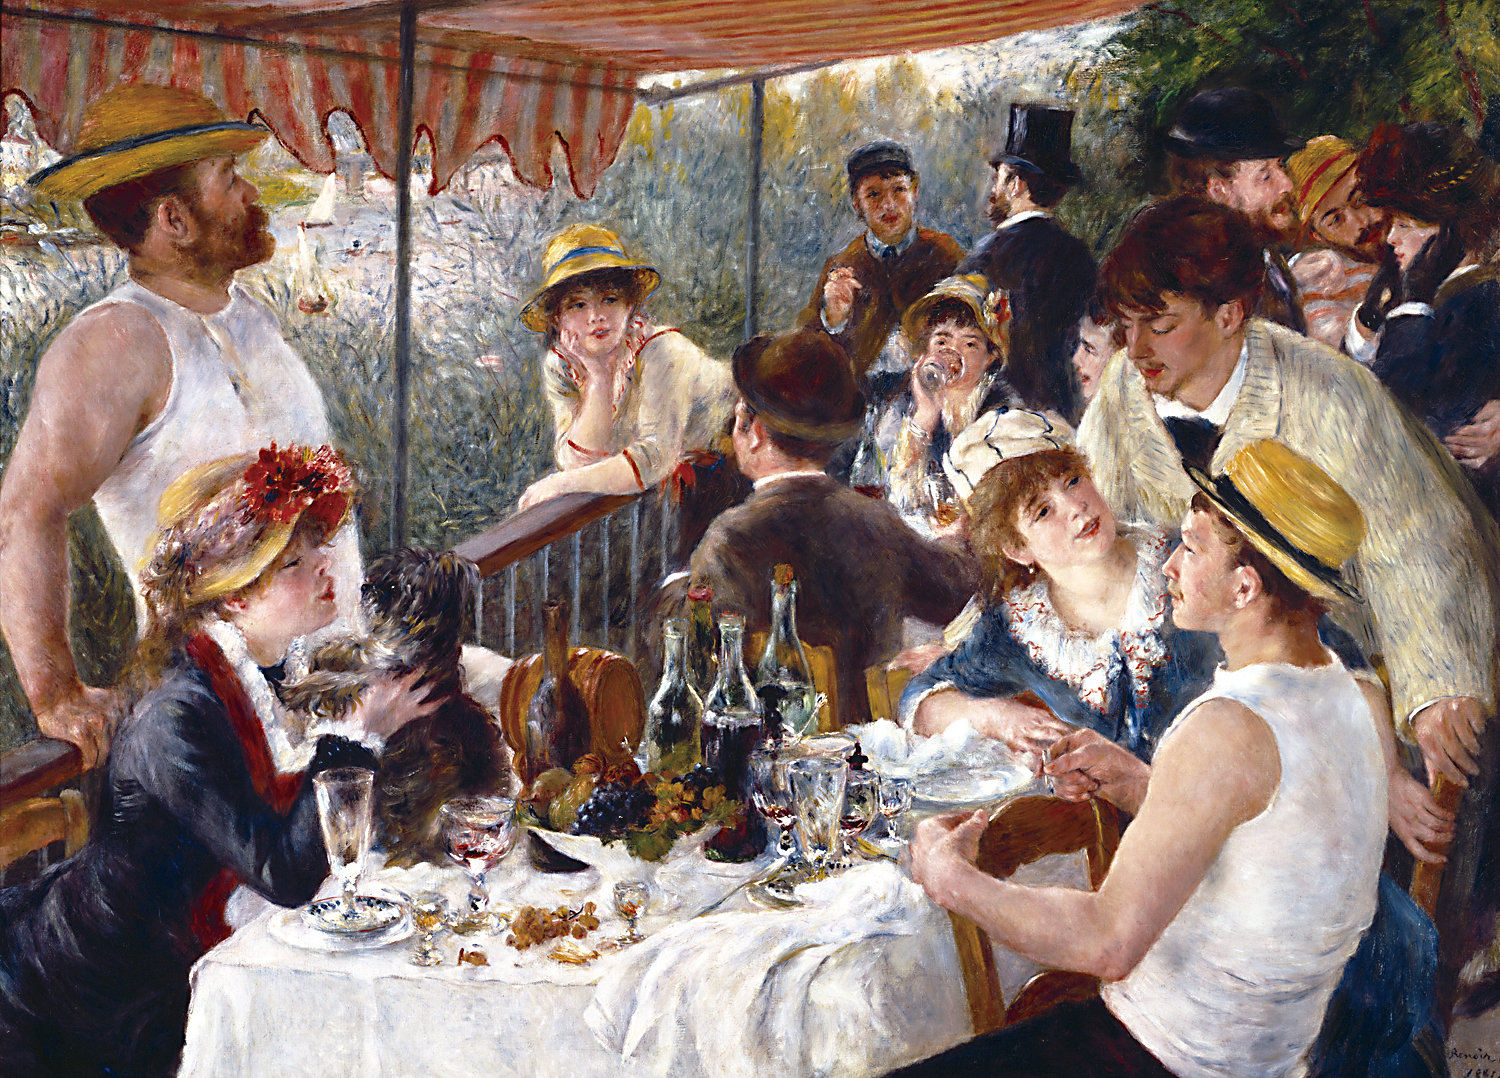 The Luncheon of the Boating Fine Art Jigsaw Puzzle